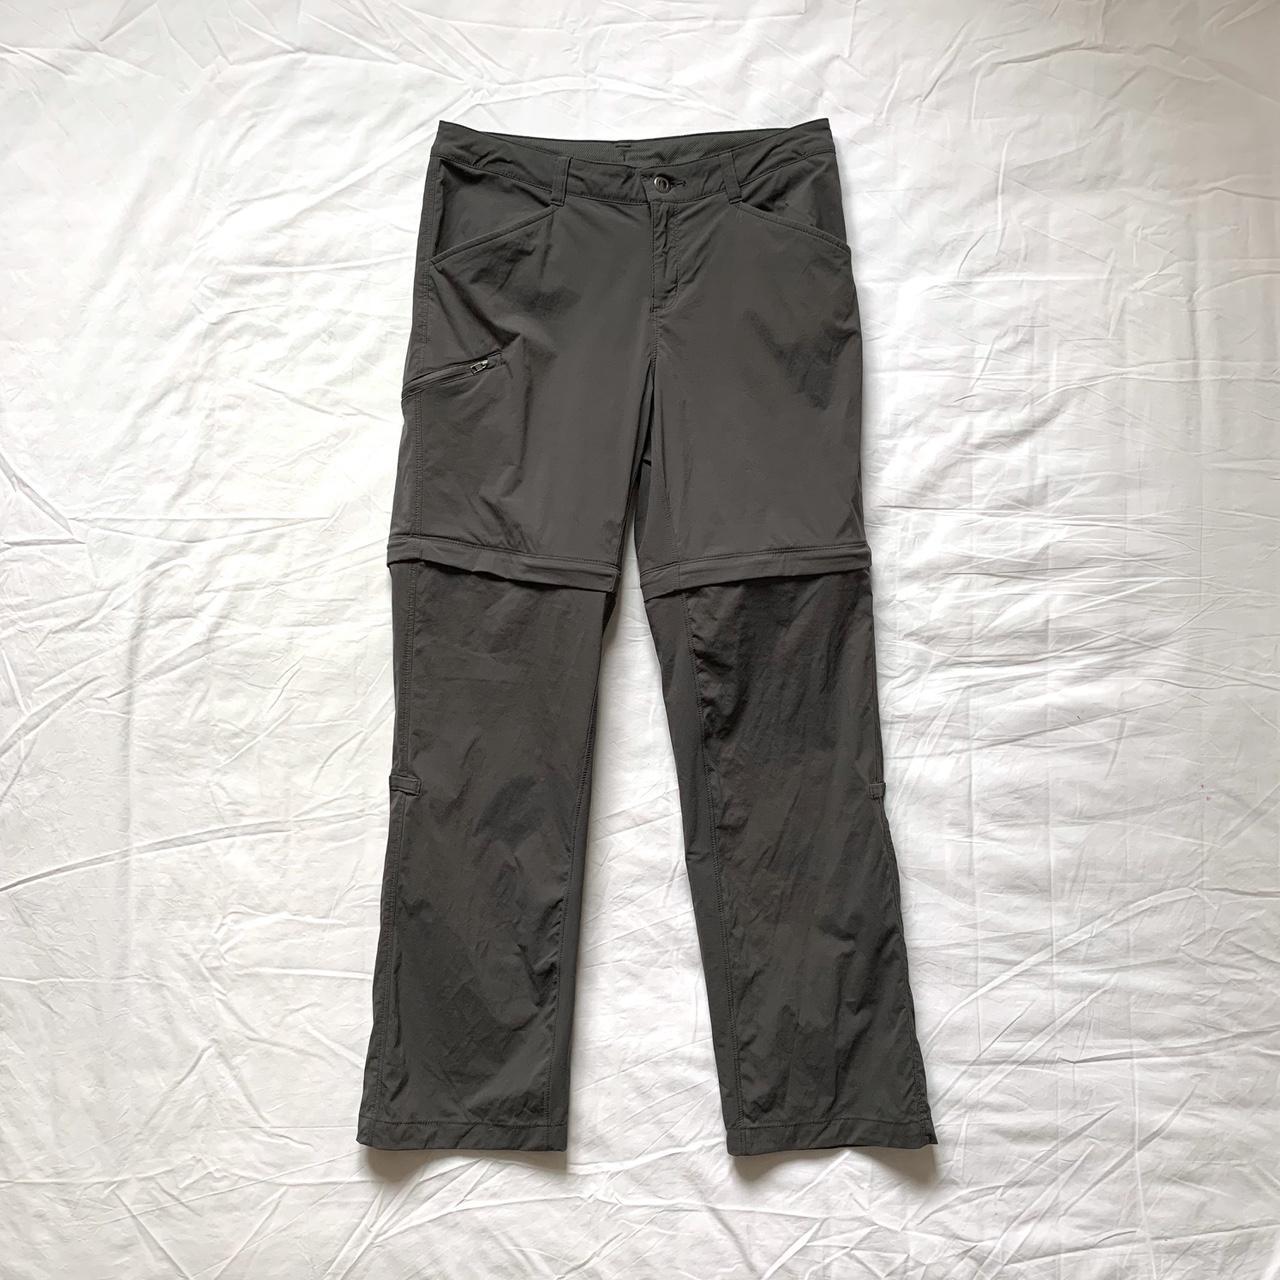 Grey Patagonia hiking trousers | Can zip off into... - Depop